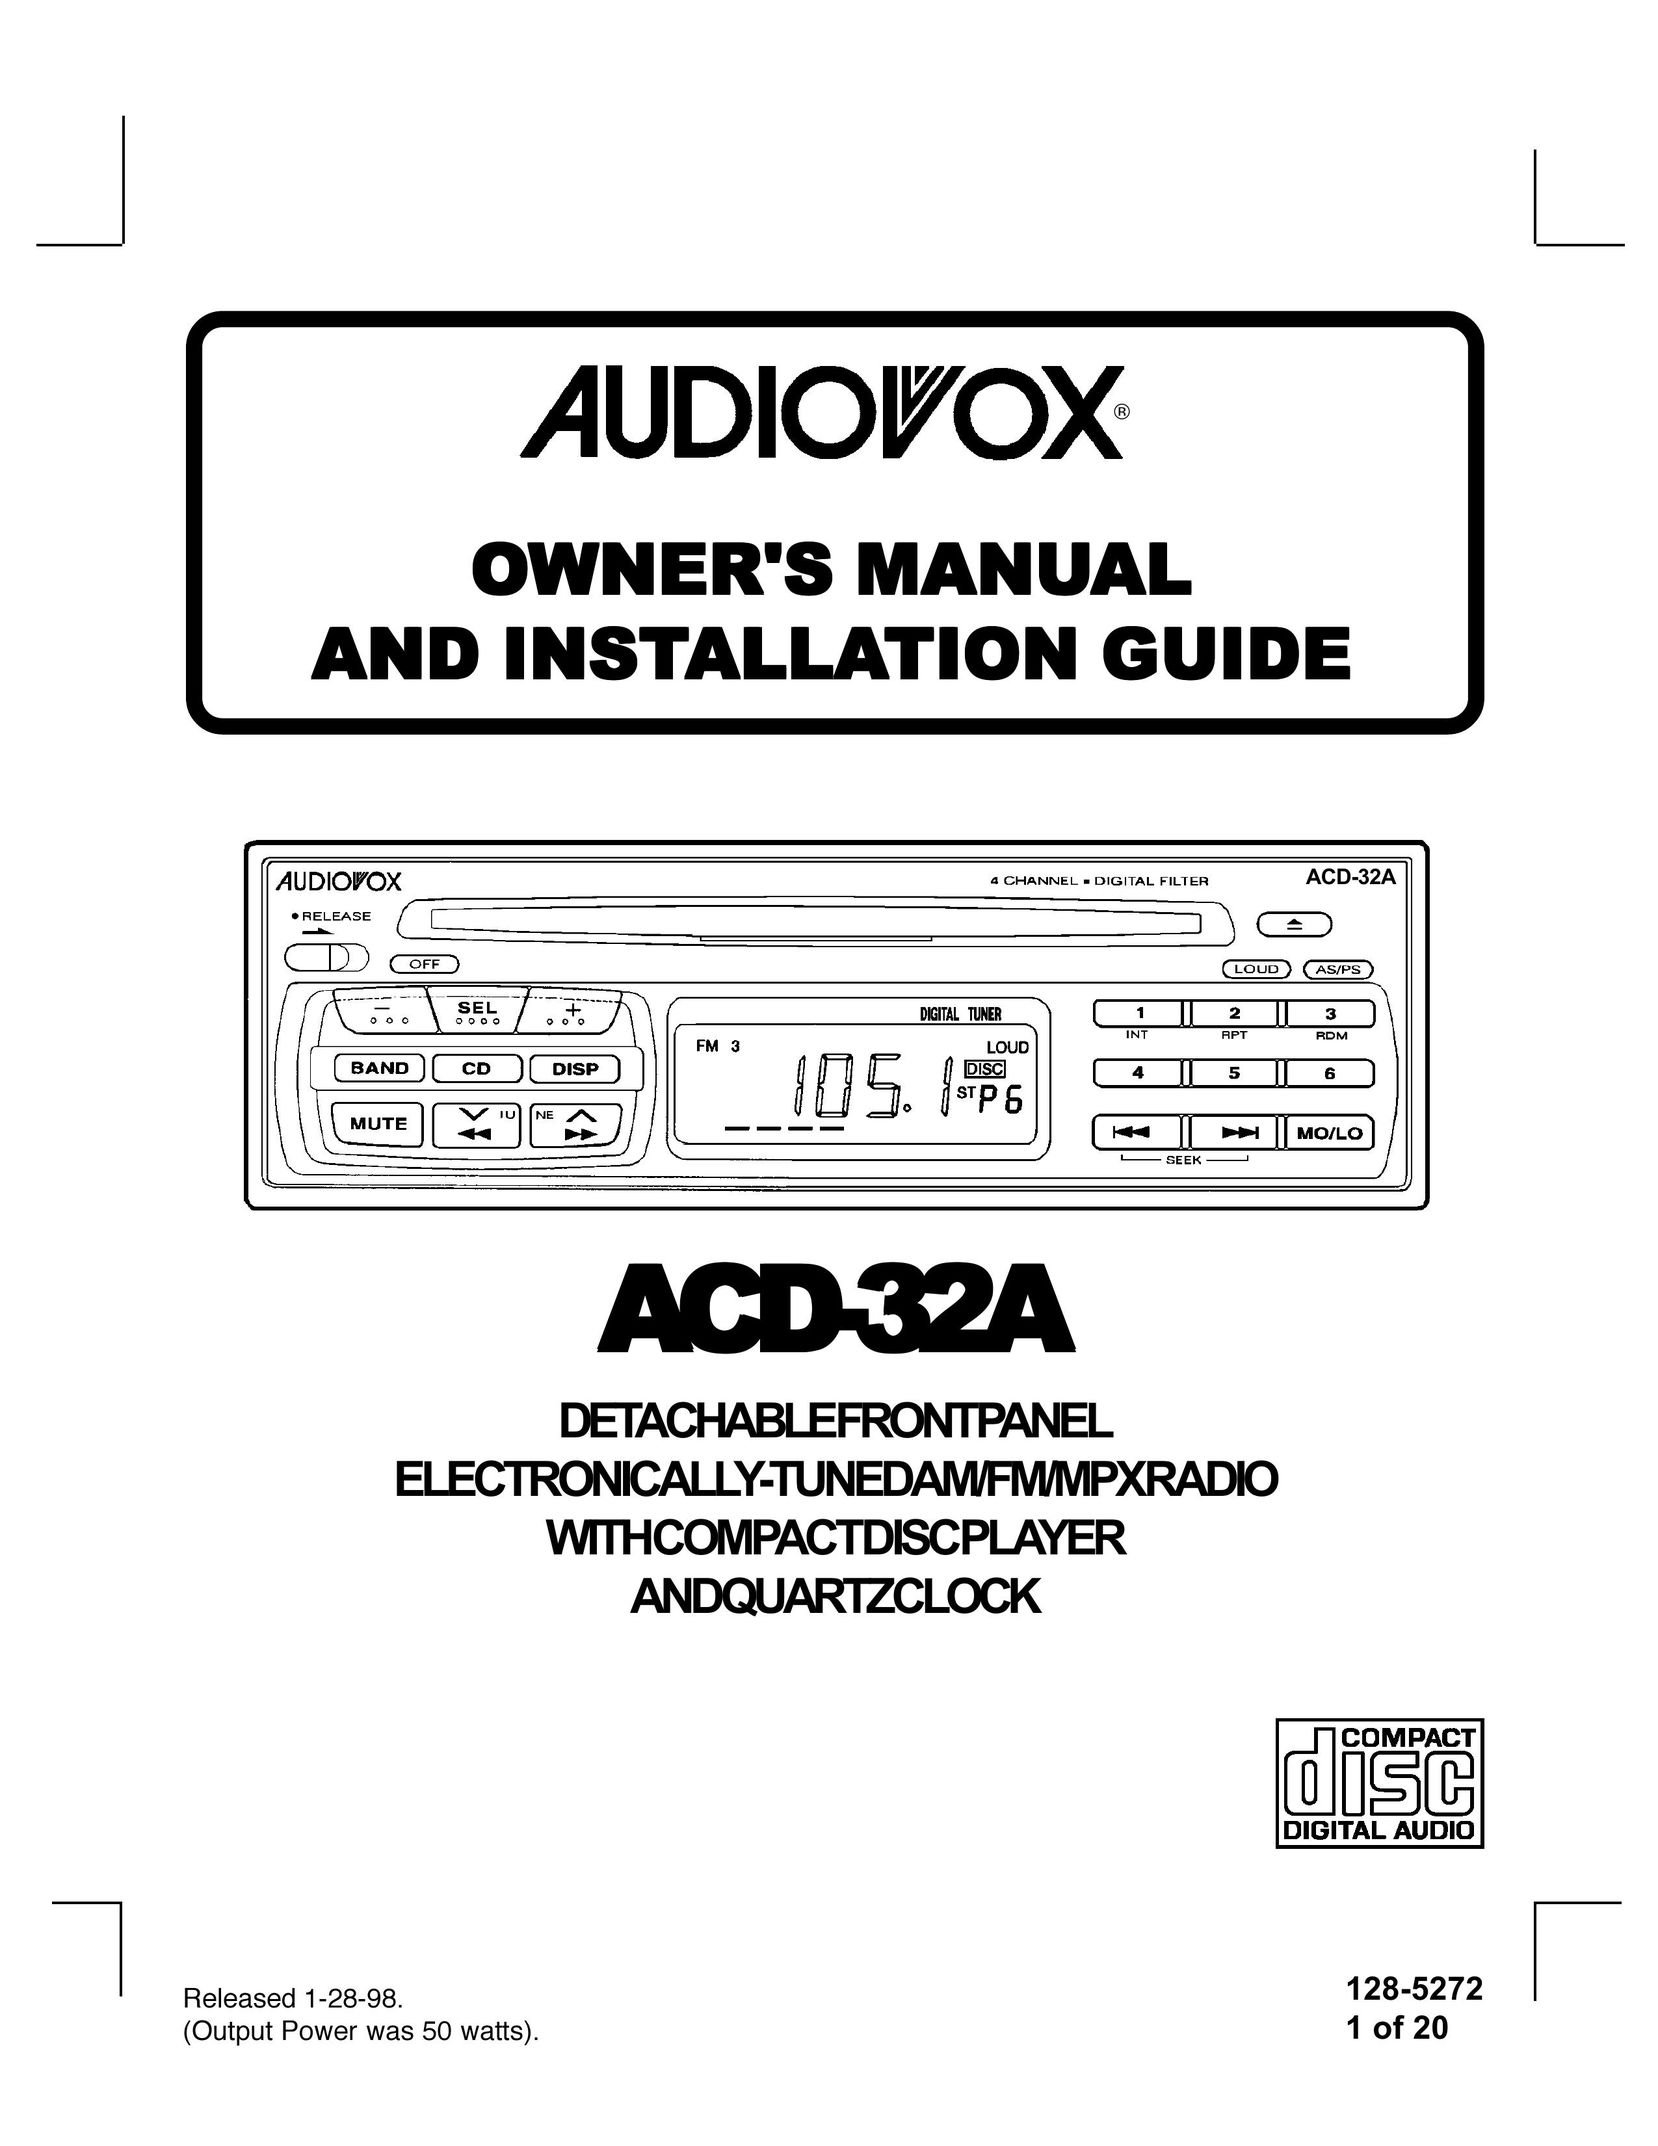 Audiovox ACD-32A Car Stereo System User Manual